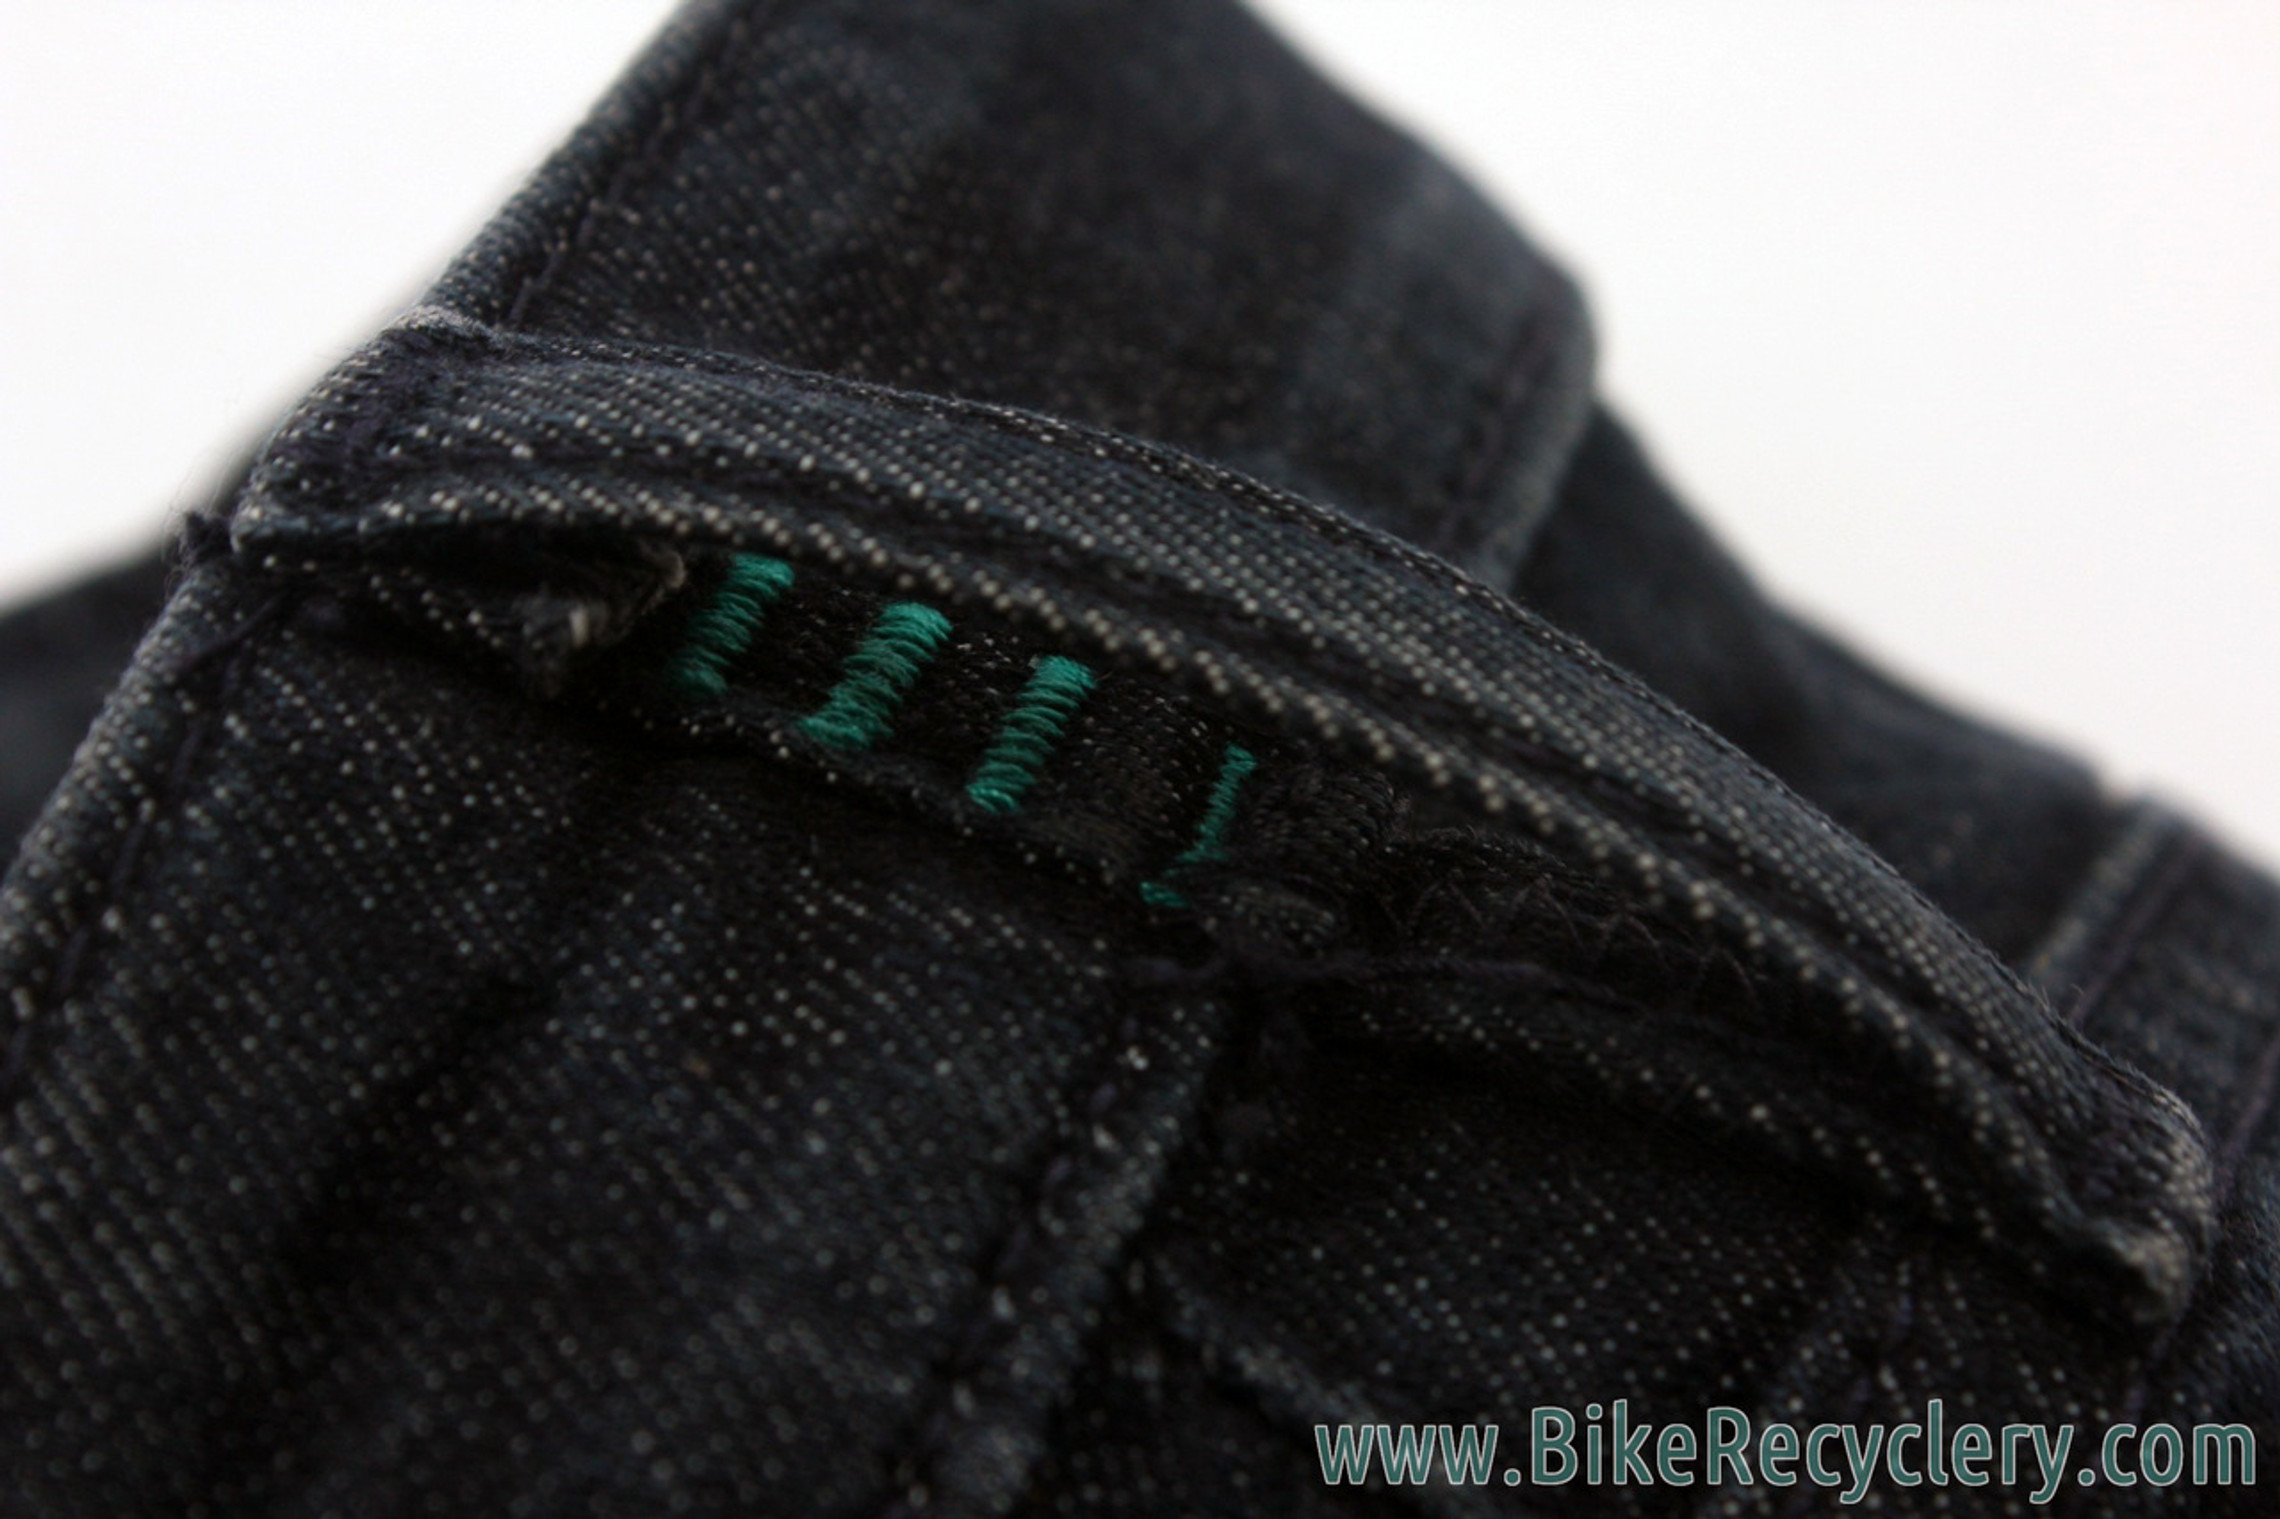 Levi's 504 Commuter Cycling Jeans: W: 29